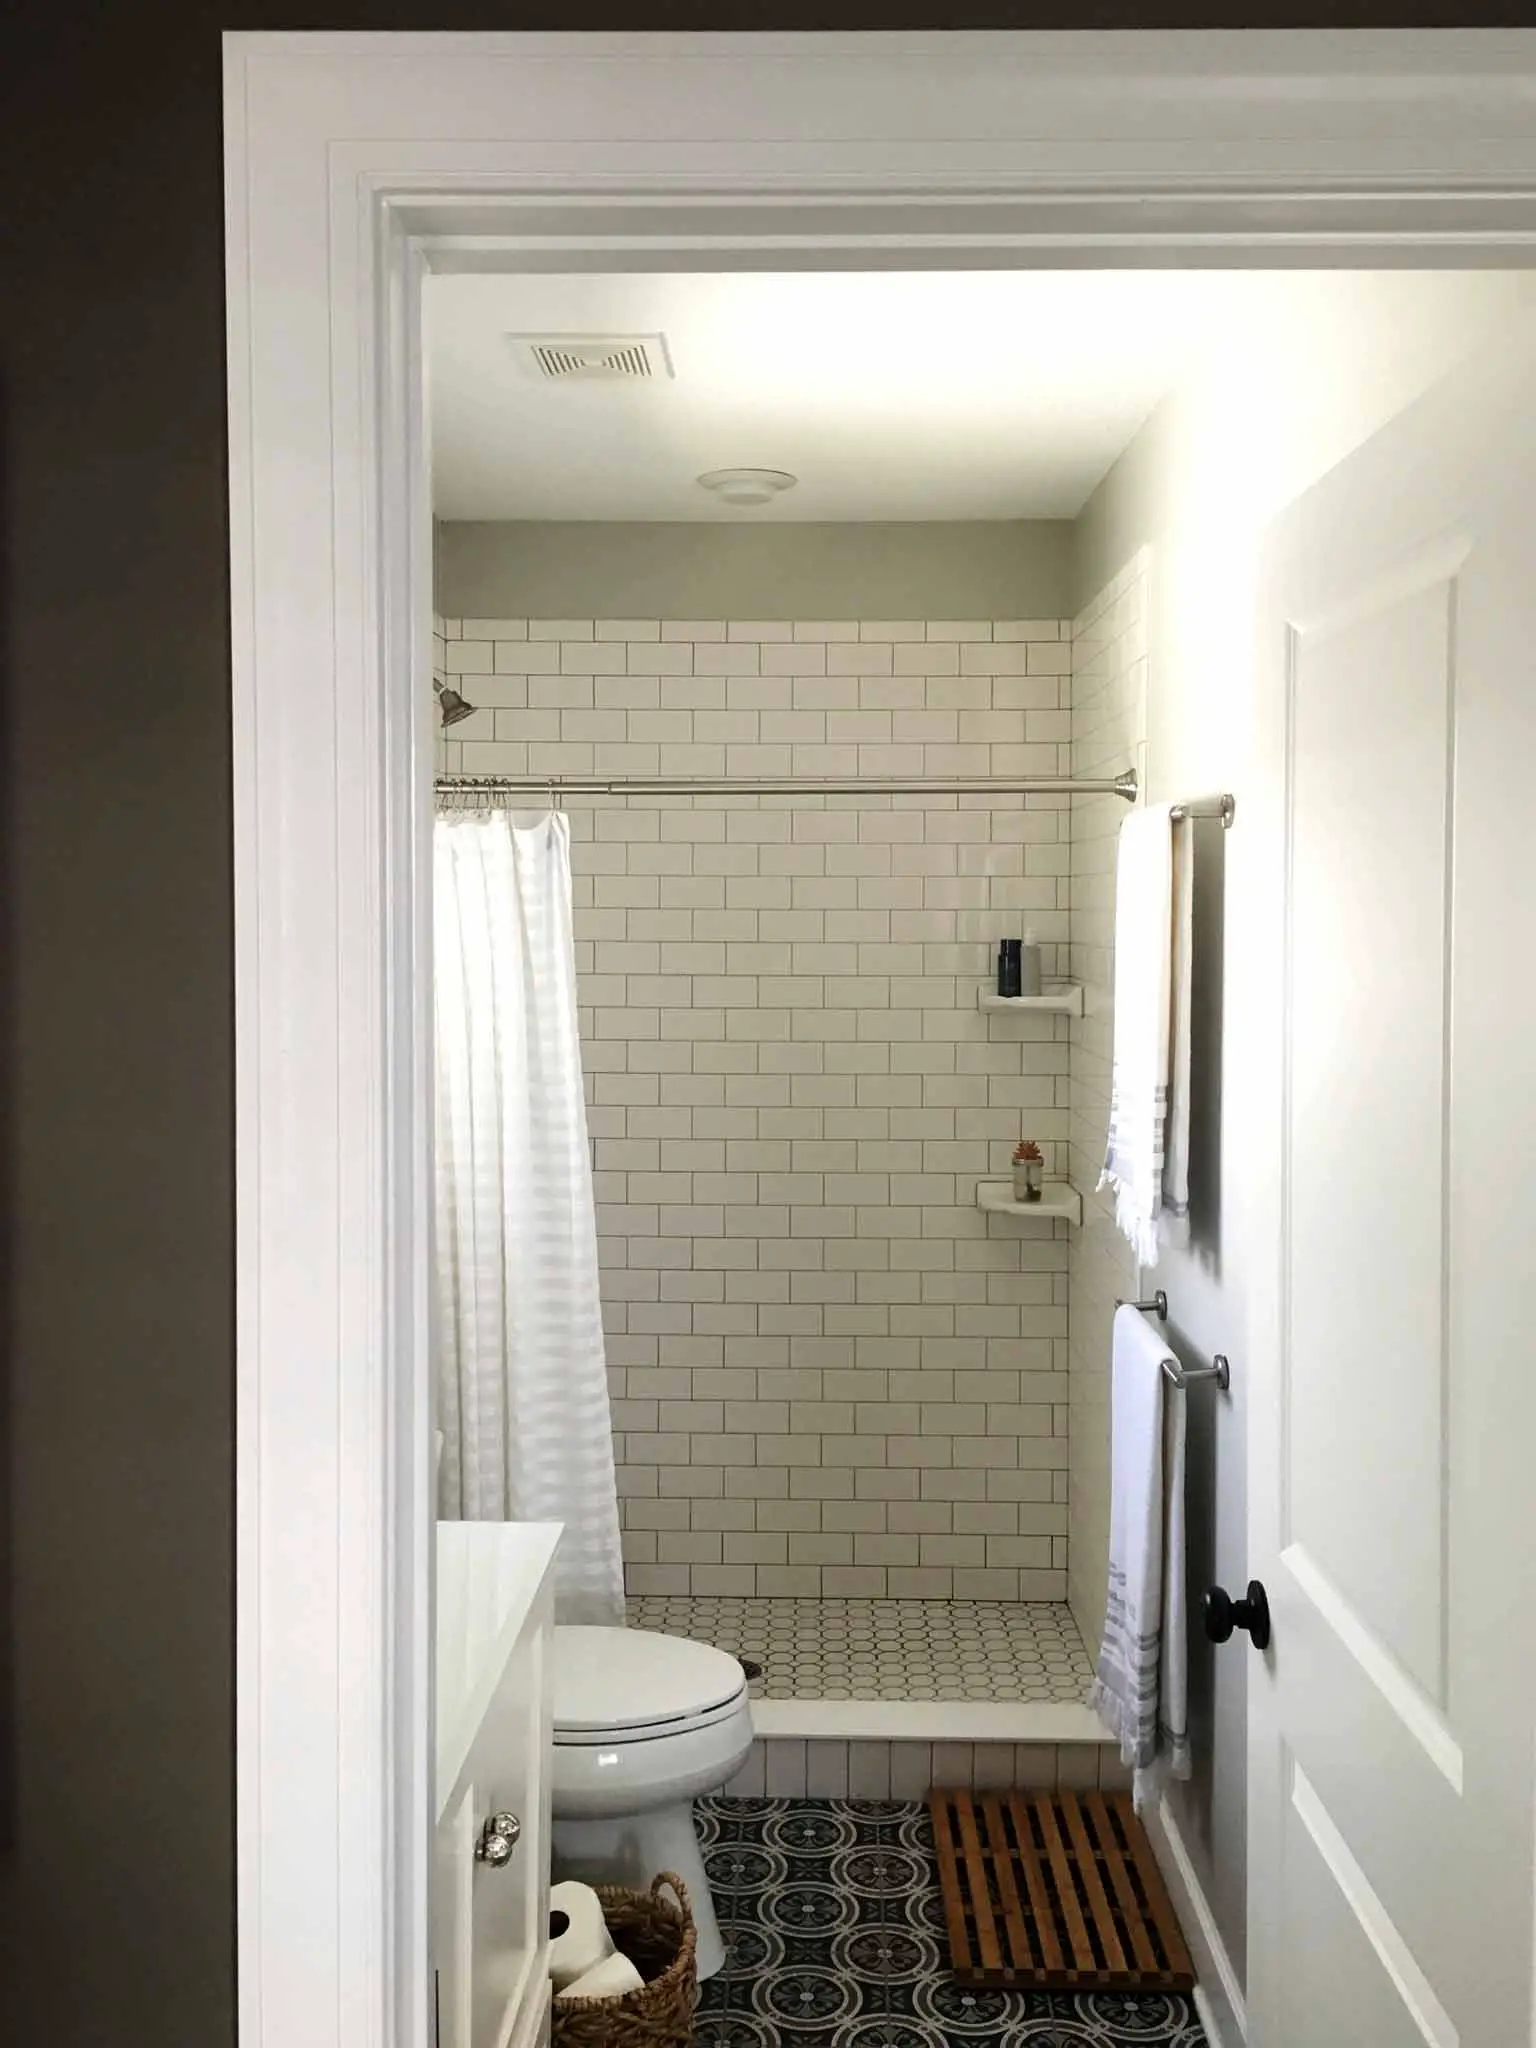 Bathroom with patterned ceramic floor tile, white subway tile and white vanity - That Homebird Life Blog